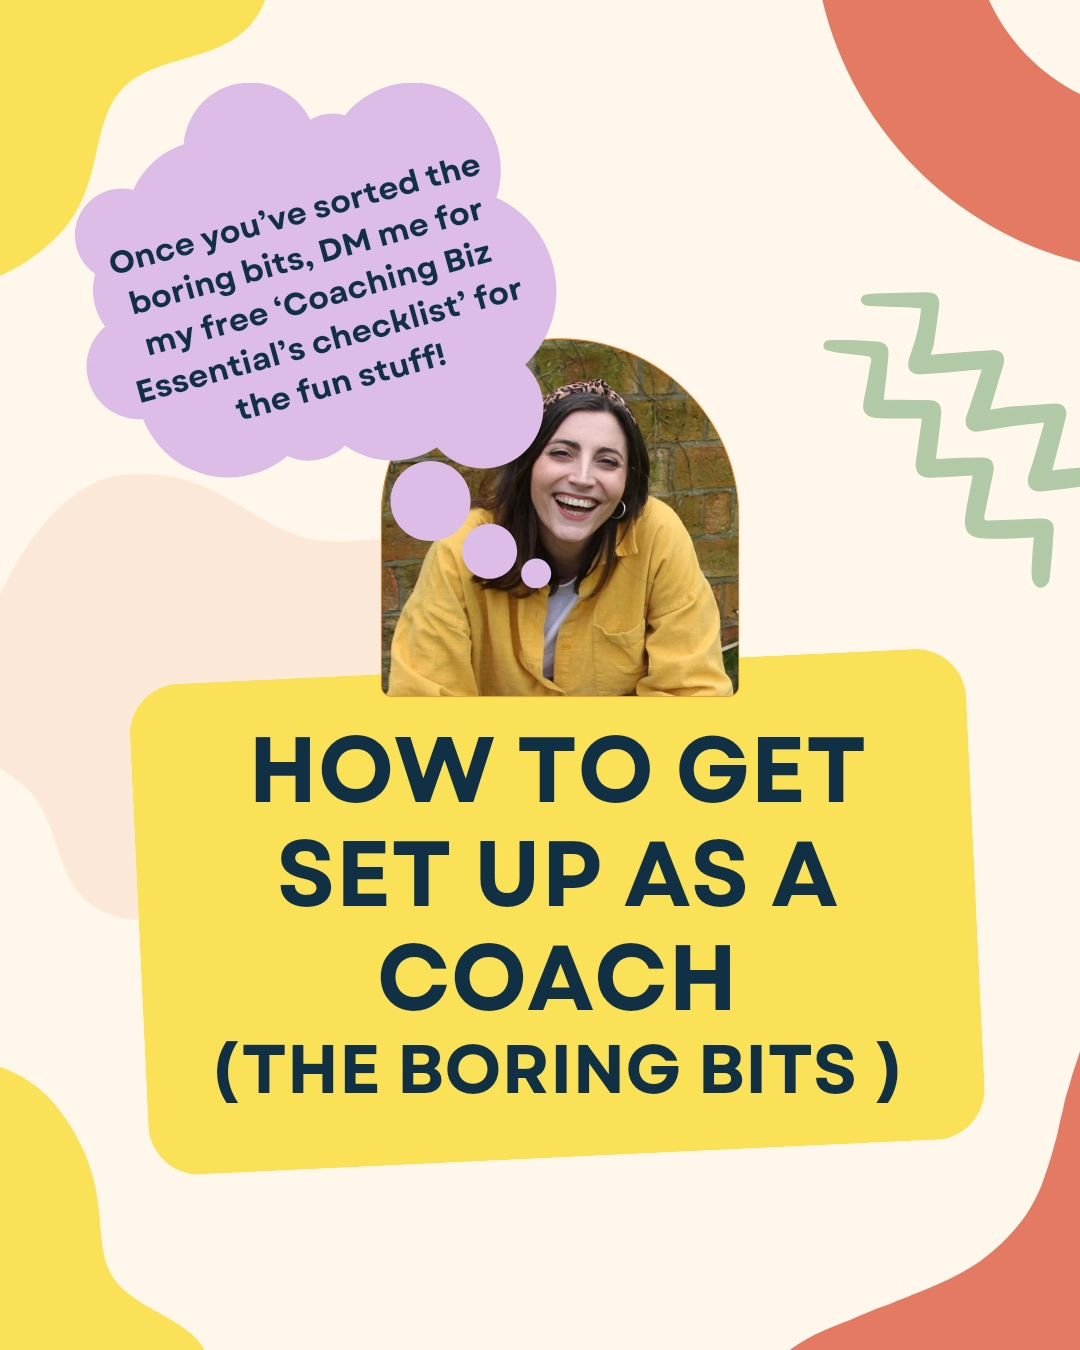 A lot of my clients get really daunted by the business/legal side of setting up as a coach. 
But honestly? It's not that complicated.

✨SAVE this post so you can come back to it whenever you need to!✨

Here are the boring bits you need to know to get